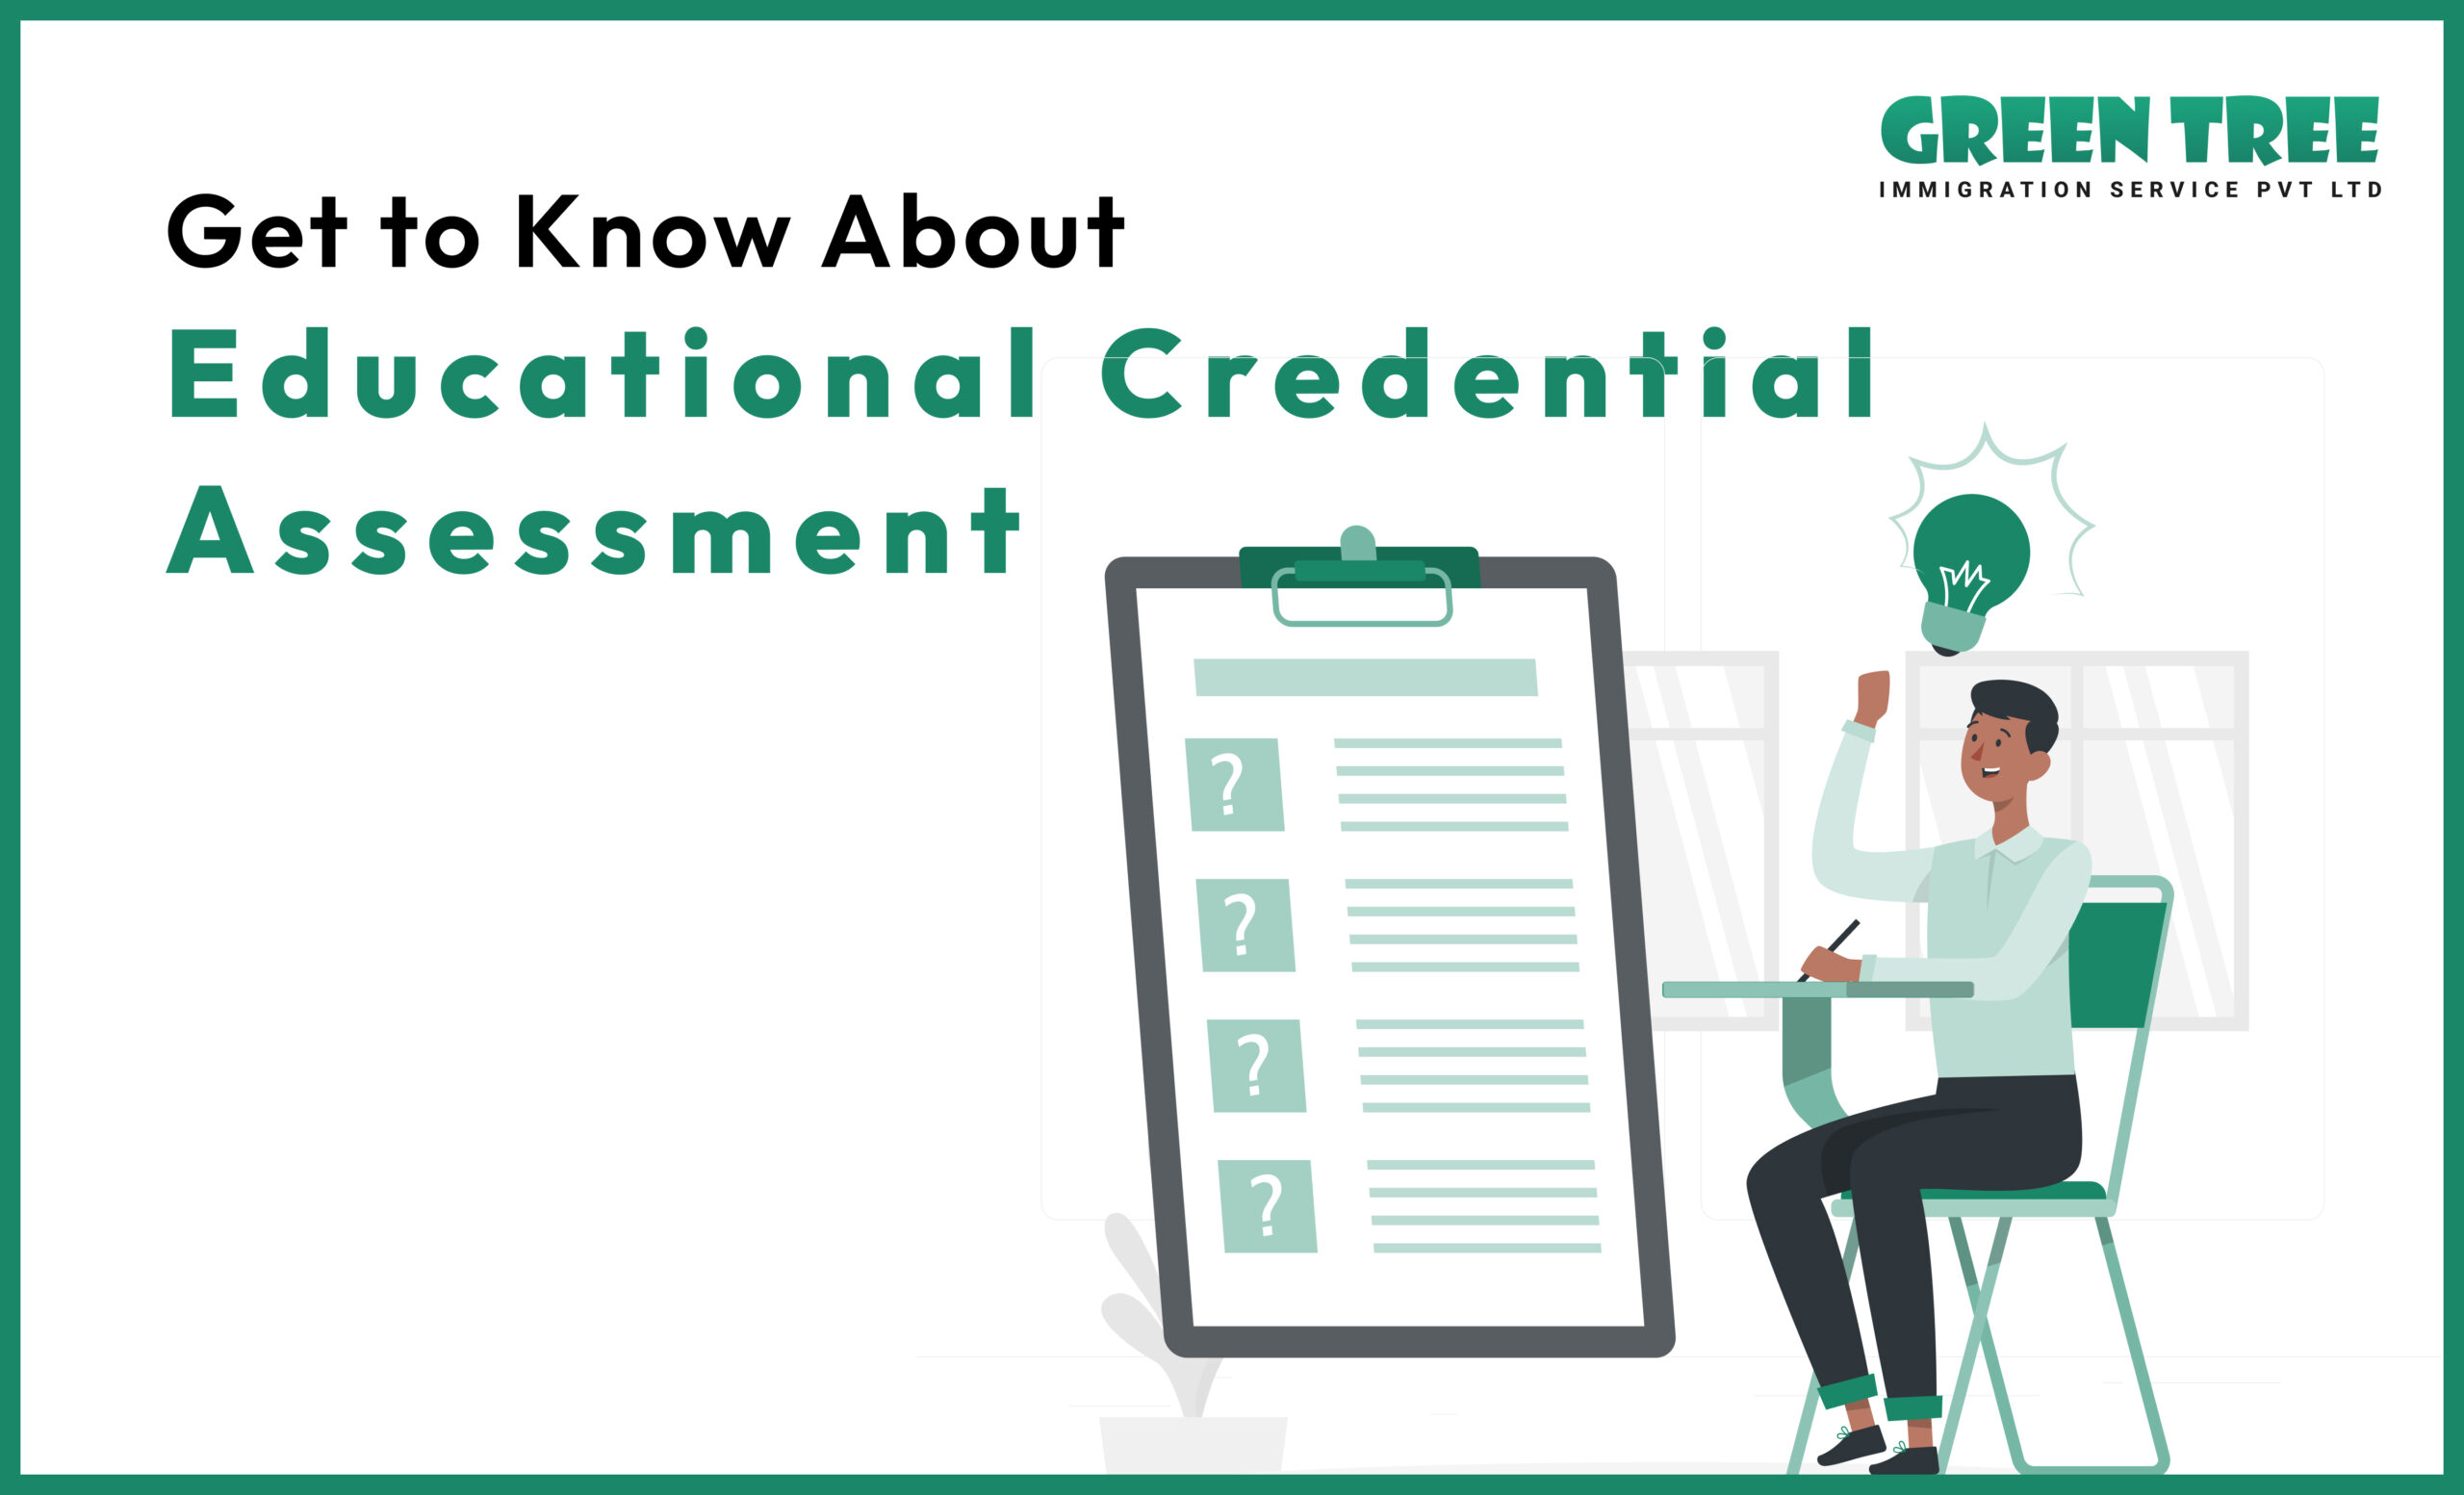 Get to Know About Educational Credential Assessment